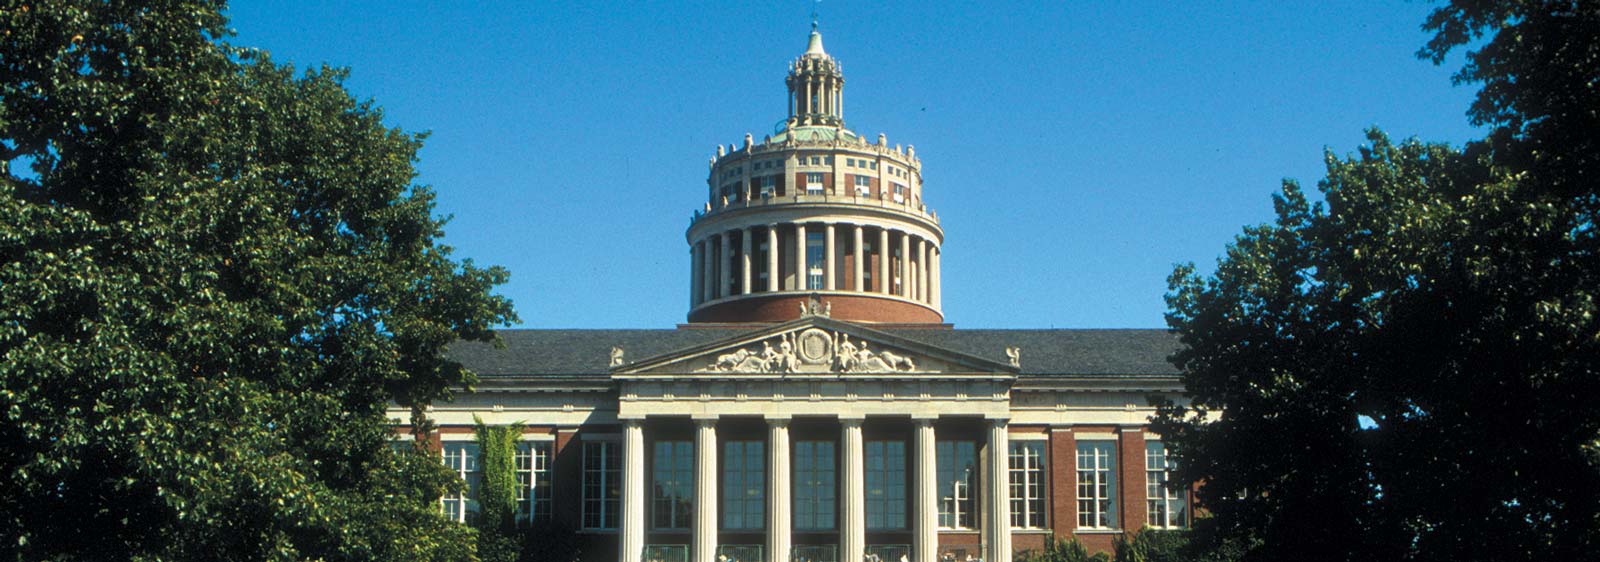 University of Rochester campus library